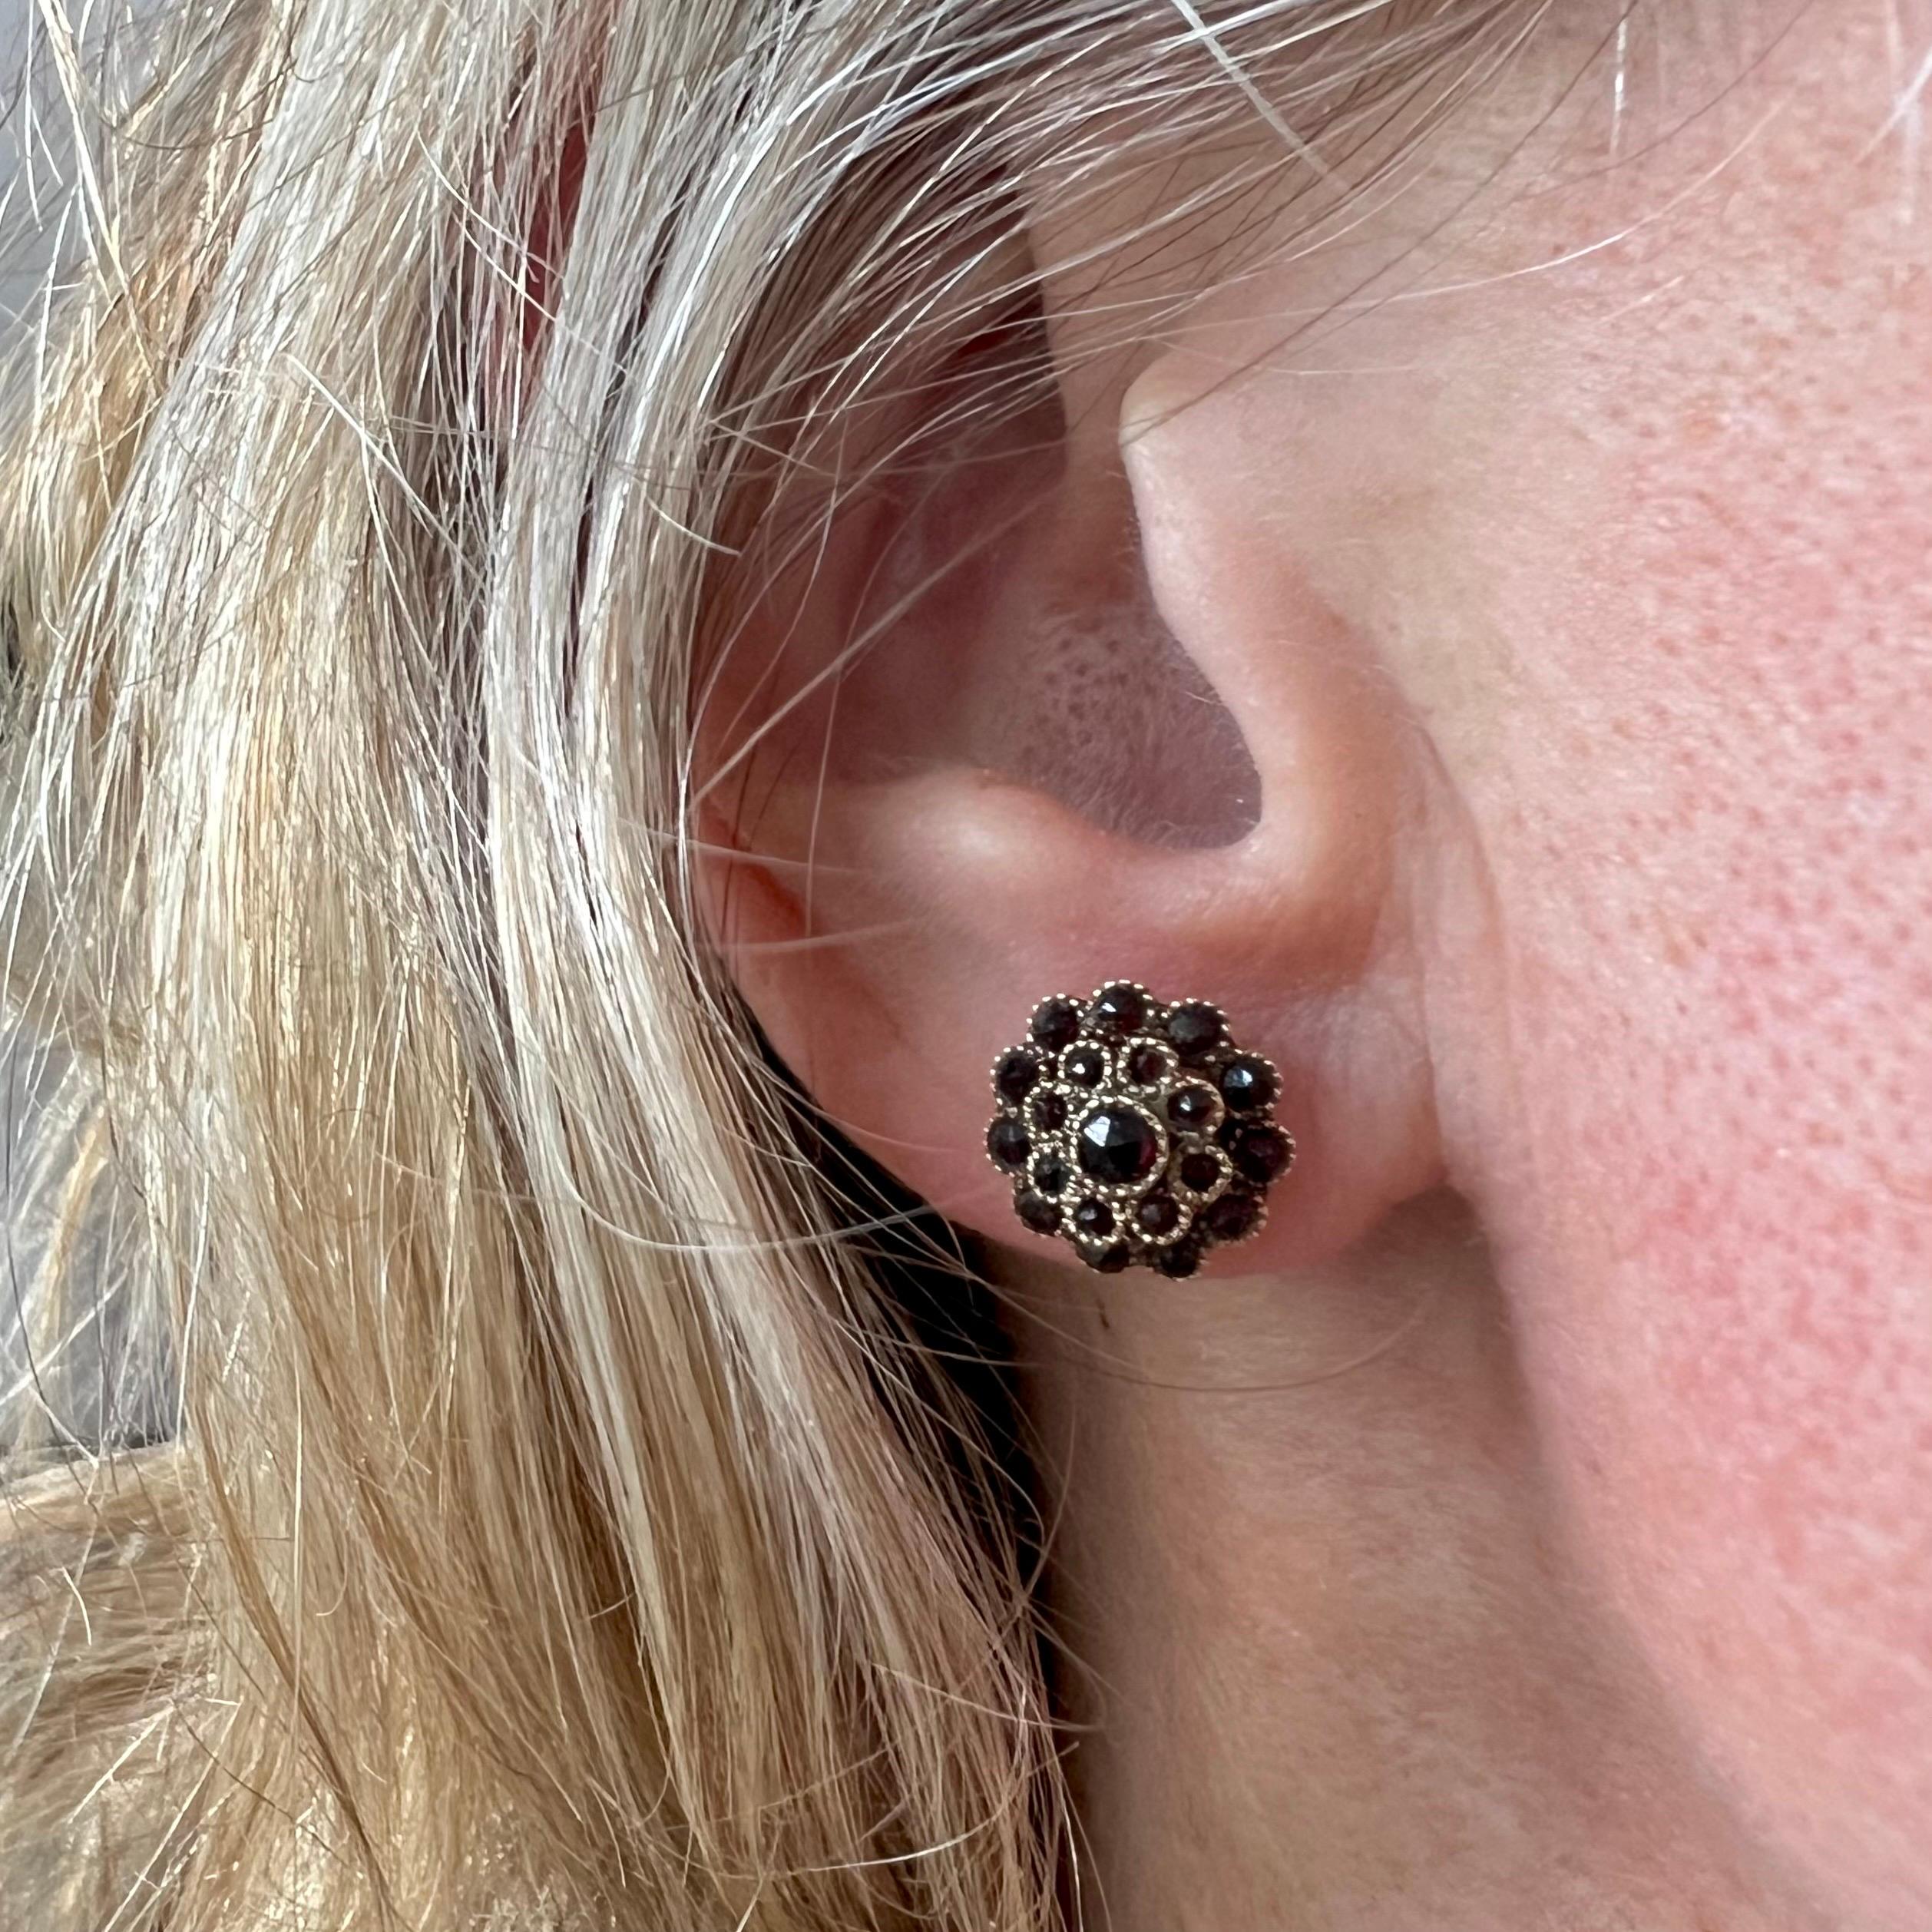 A lovely pair of antique natural red garnet clustered stud earrings. These Dutch antique flower shaped studs are set with a cluster of many small garnets and are bezel set in a 14 karat gold mounting with a worked rim. The garnet stones have a